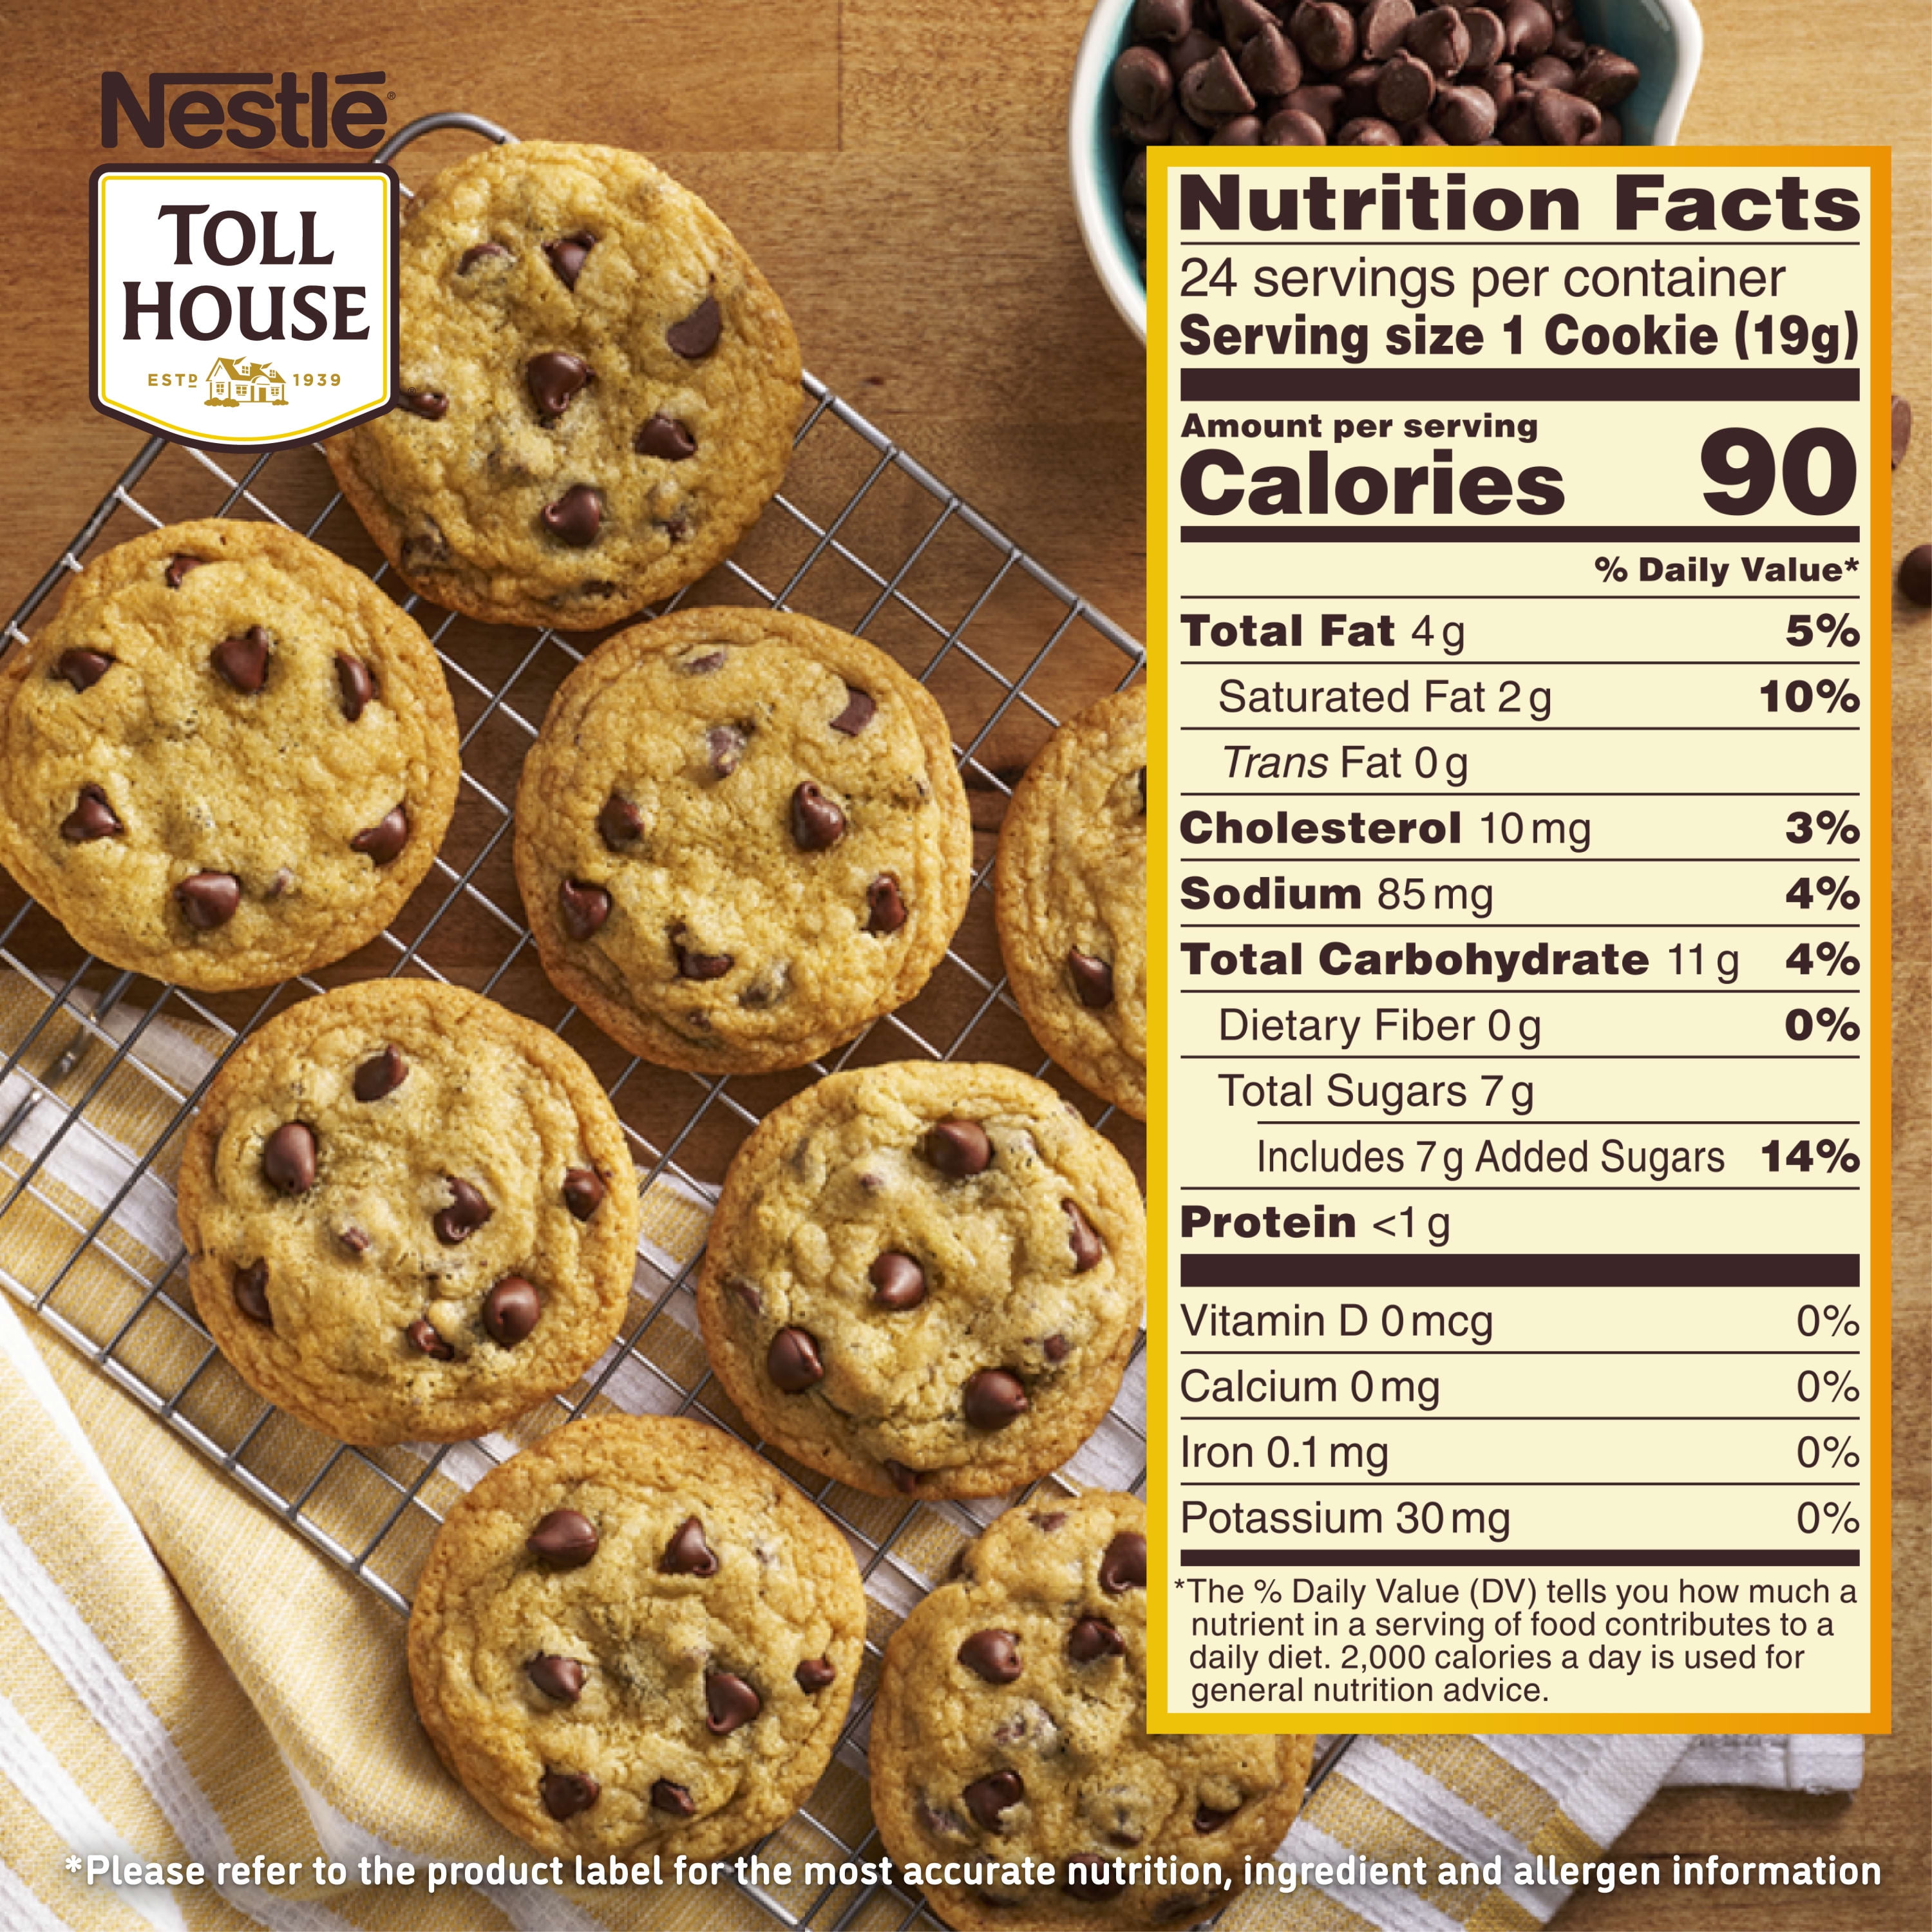 Save on Nestle Toll House Edible Cookie Dough Chocolate Chip Order Online  Delivery